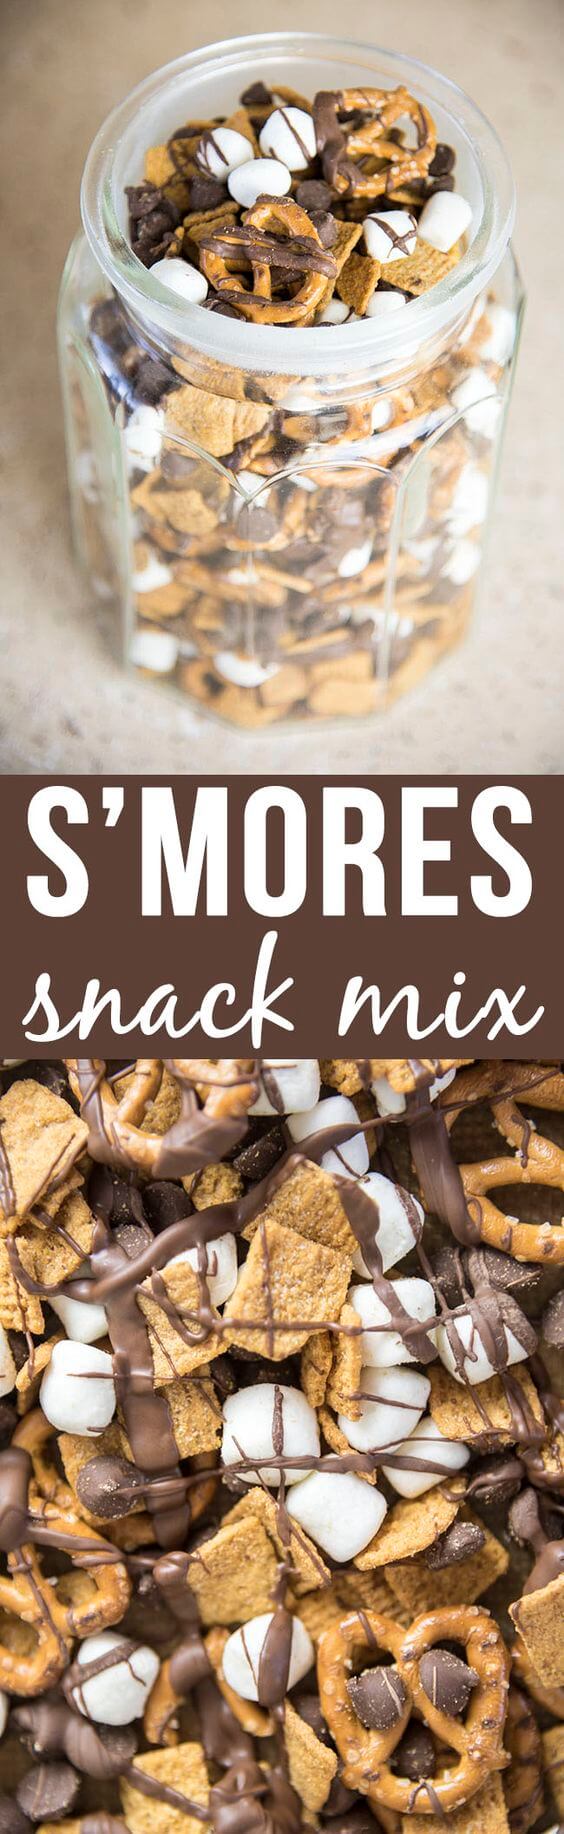 photo of s'mores snack mix recipe for baby shower or party